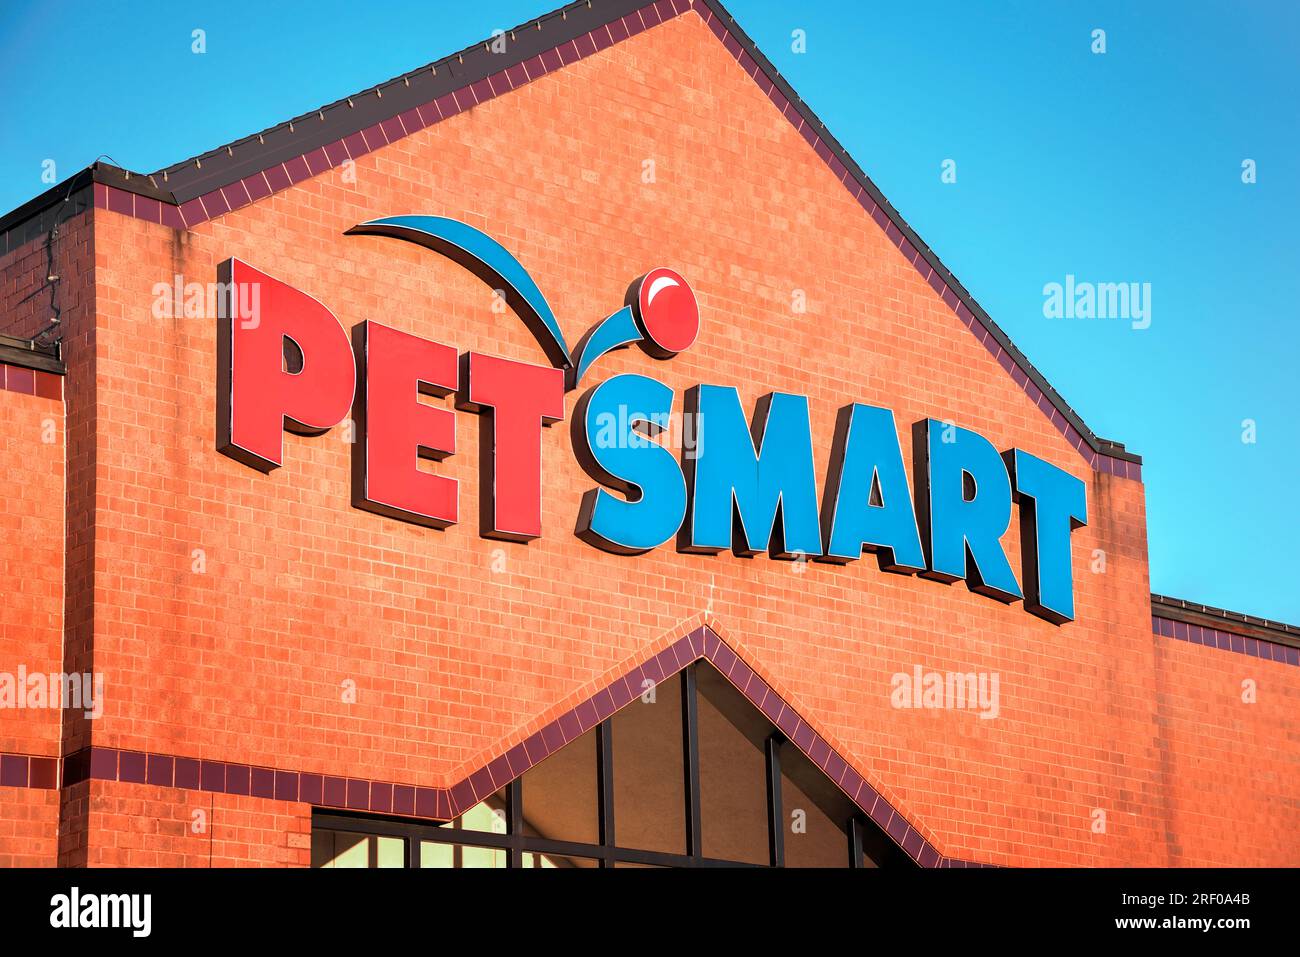 Springfield, Missouri - November 1, 2019: PetSmart Inc. an American retail chain engaged in the sale of specialty pet animal products and small pets. Stock Photo